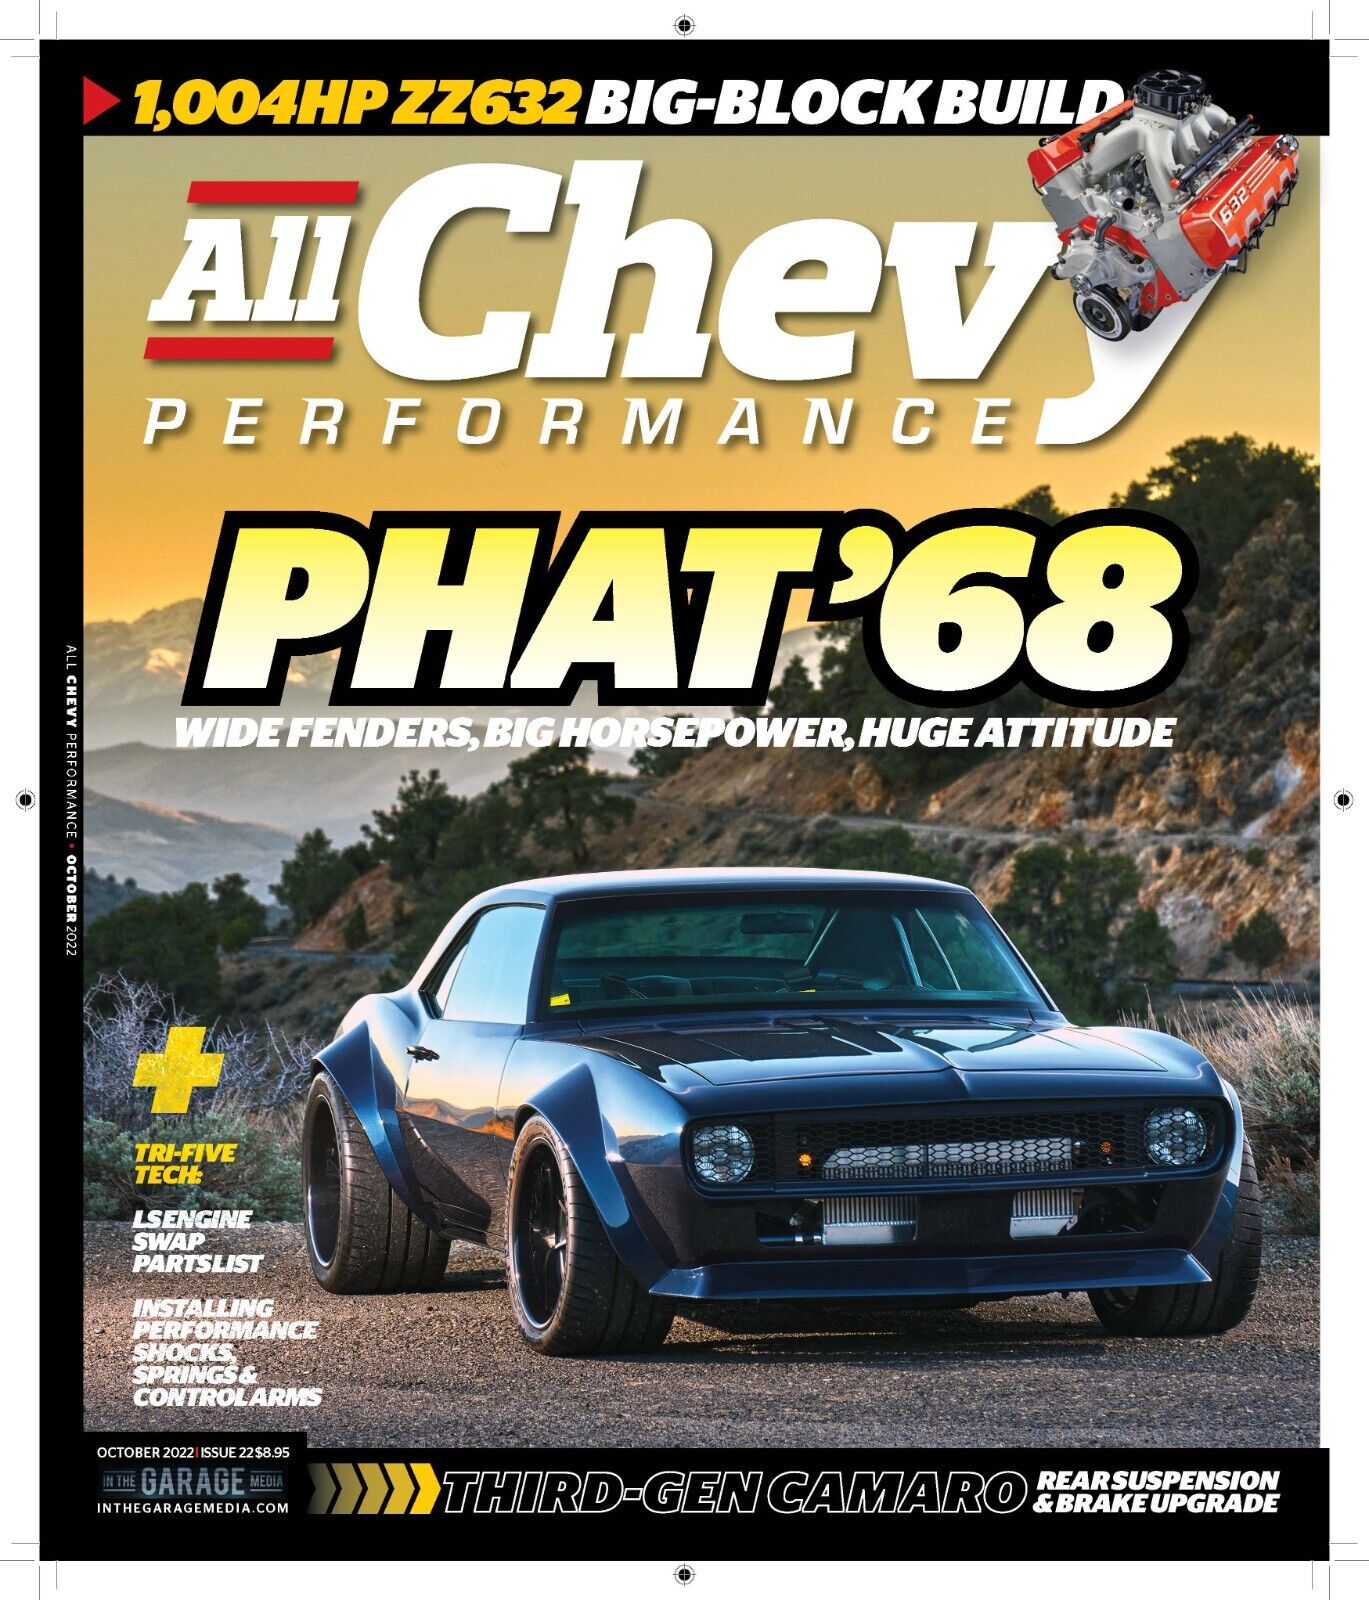 All Chevy Performance Magazine Issue #22 October 2022 - New